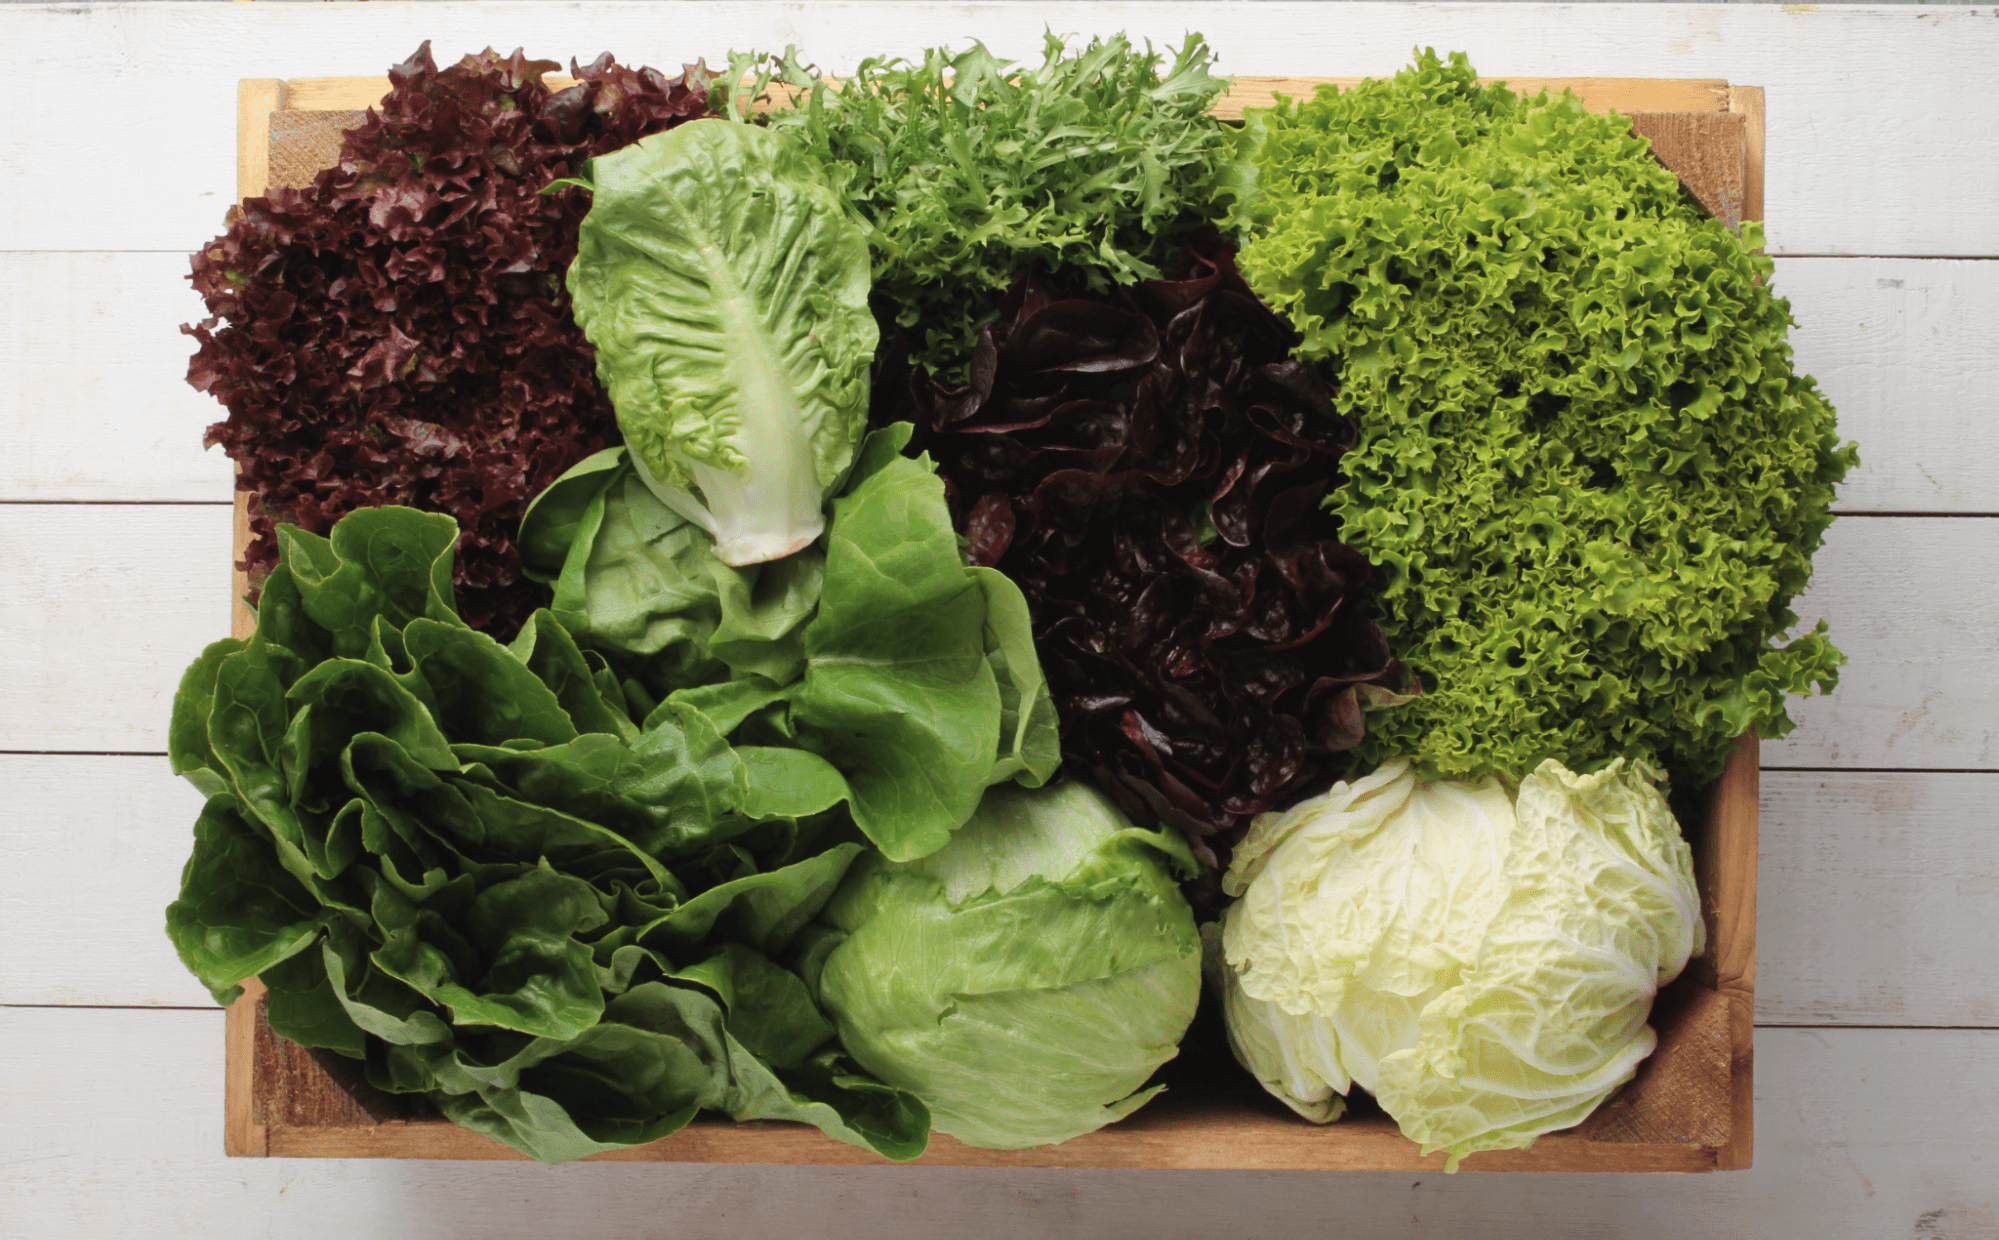 A varieties of types of lettuces you can learn how to grow.